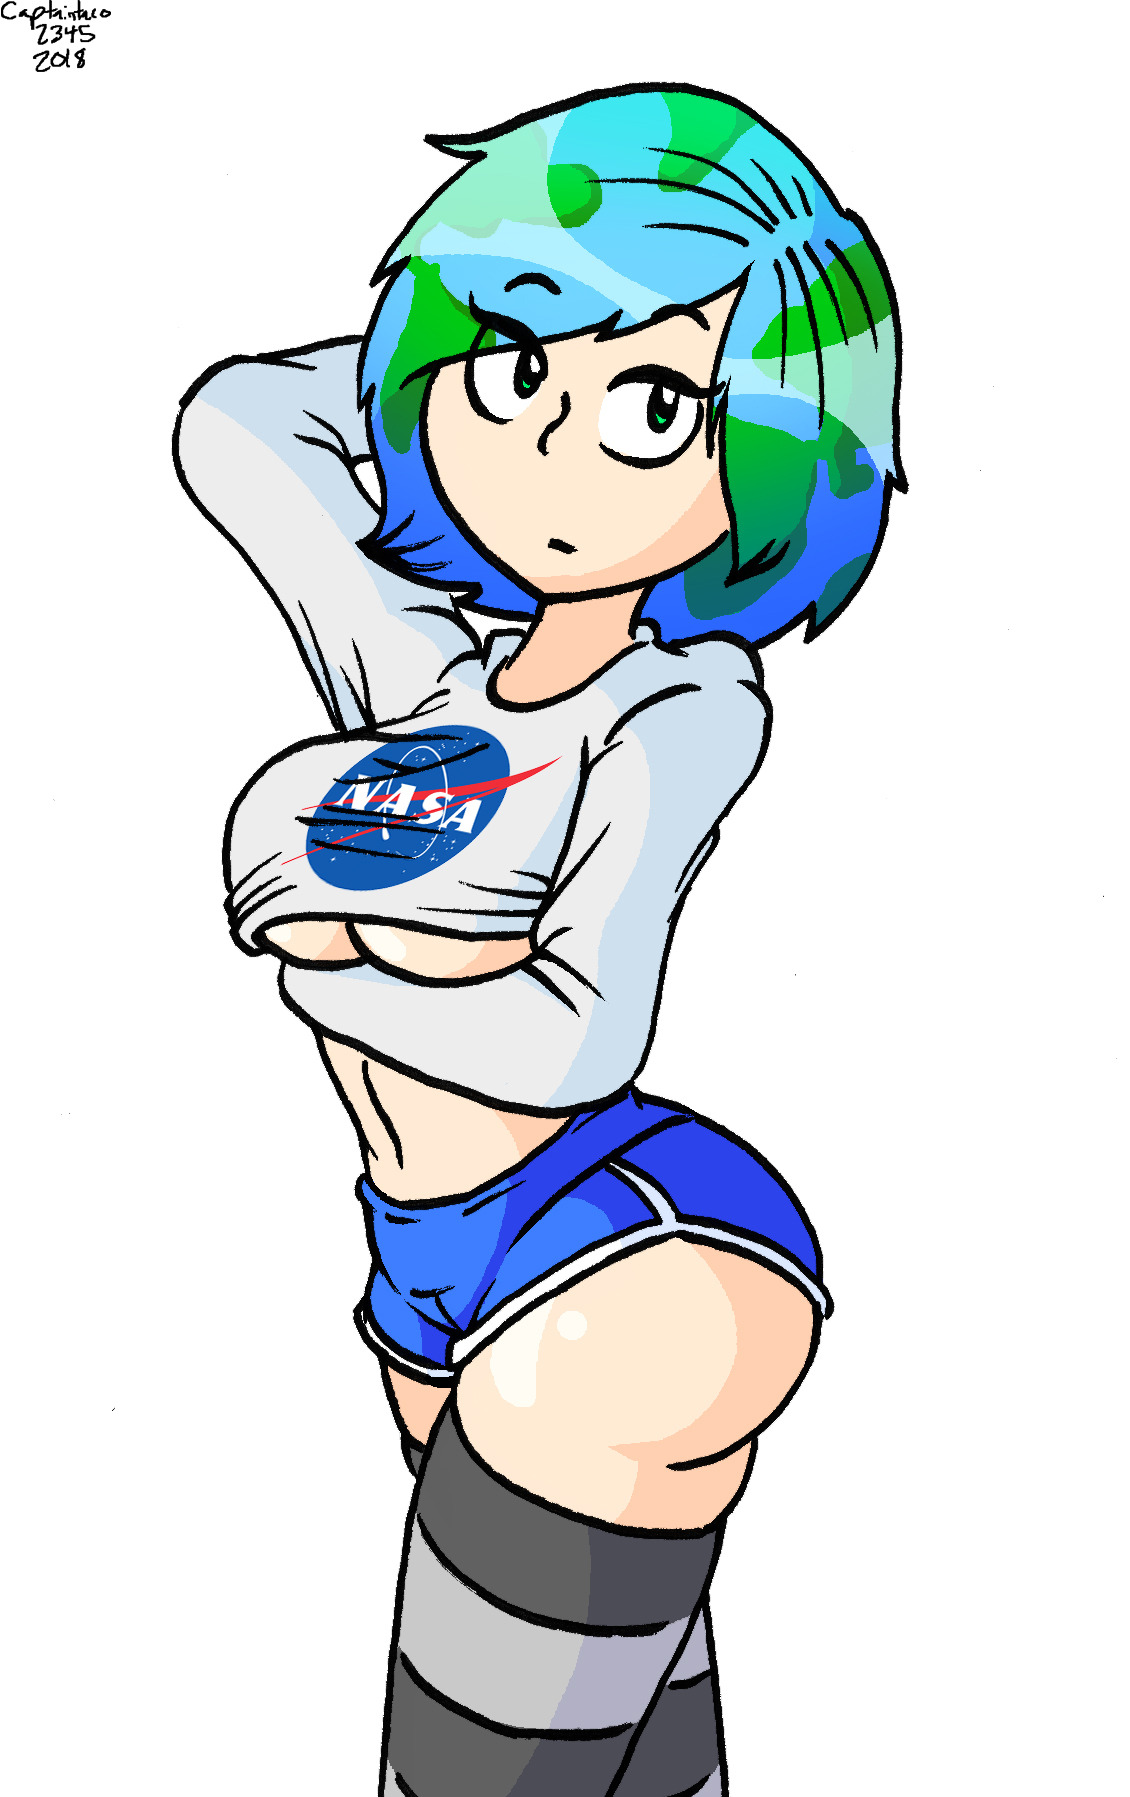 I’ve been meaning to draw Jenna Lynn Mowry’s Earth Chan cosplay for a while.